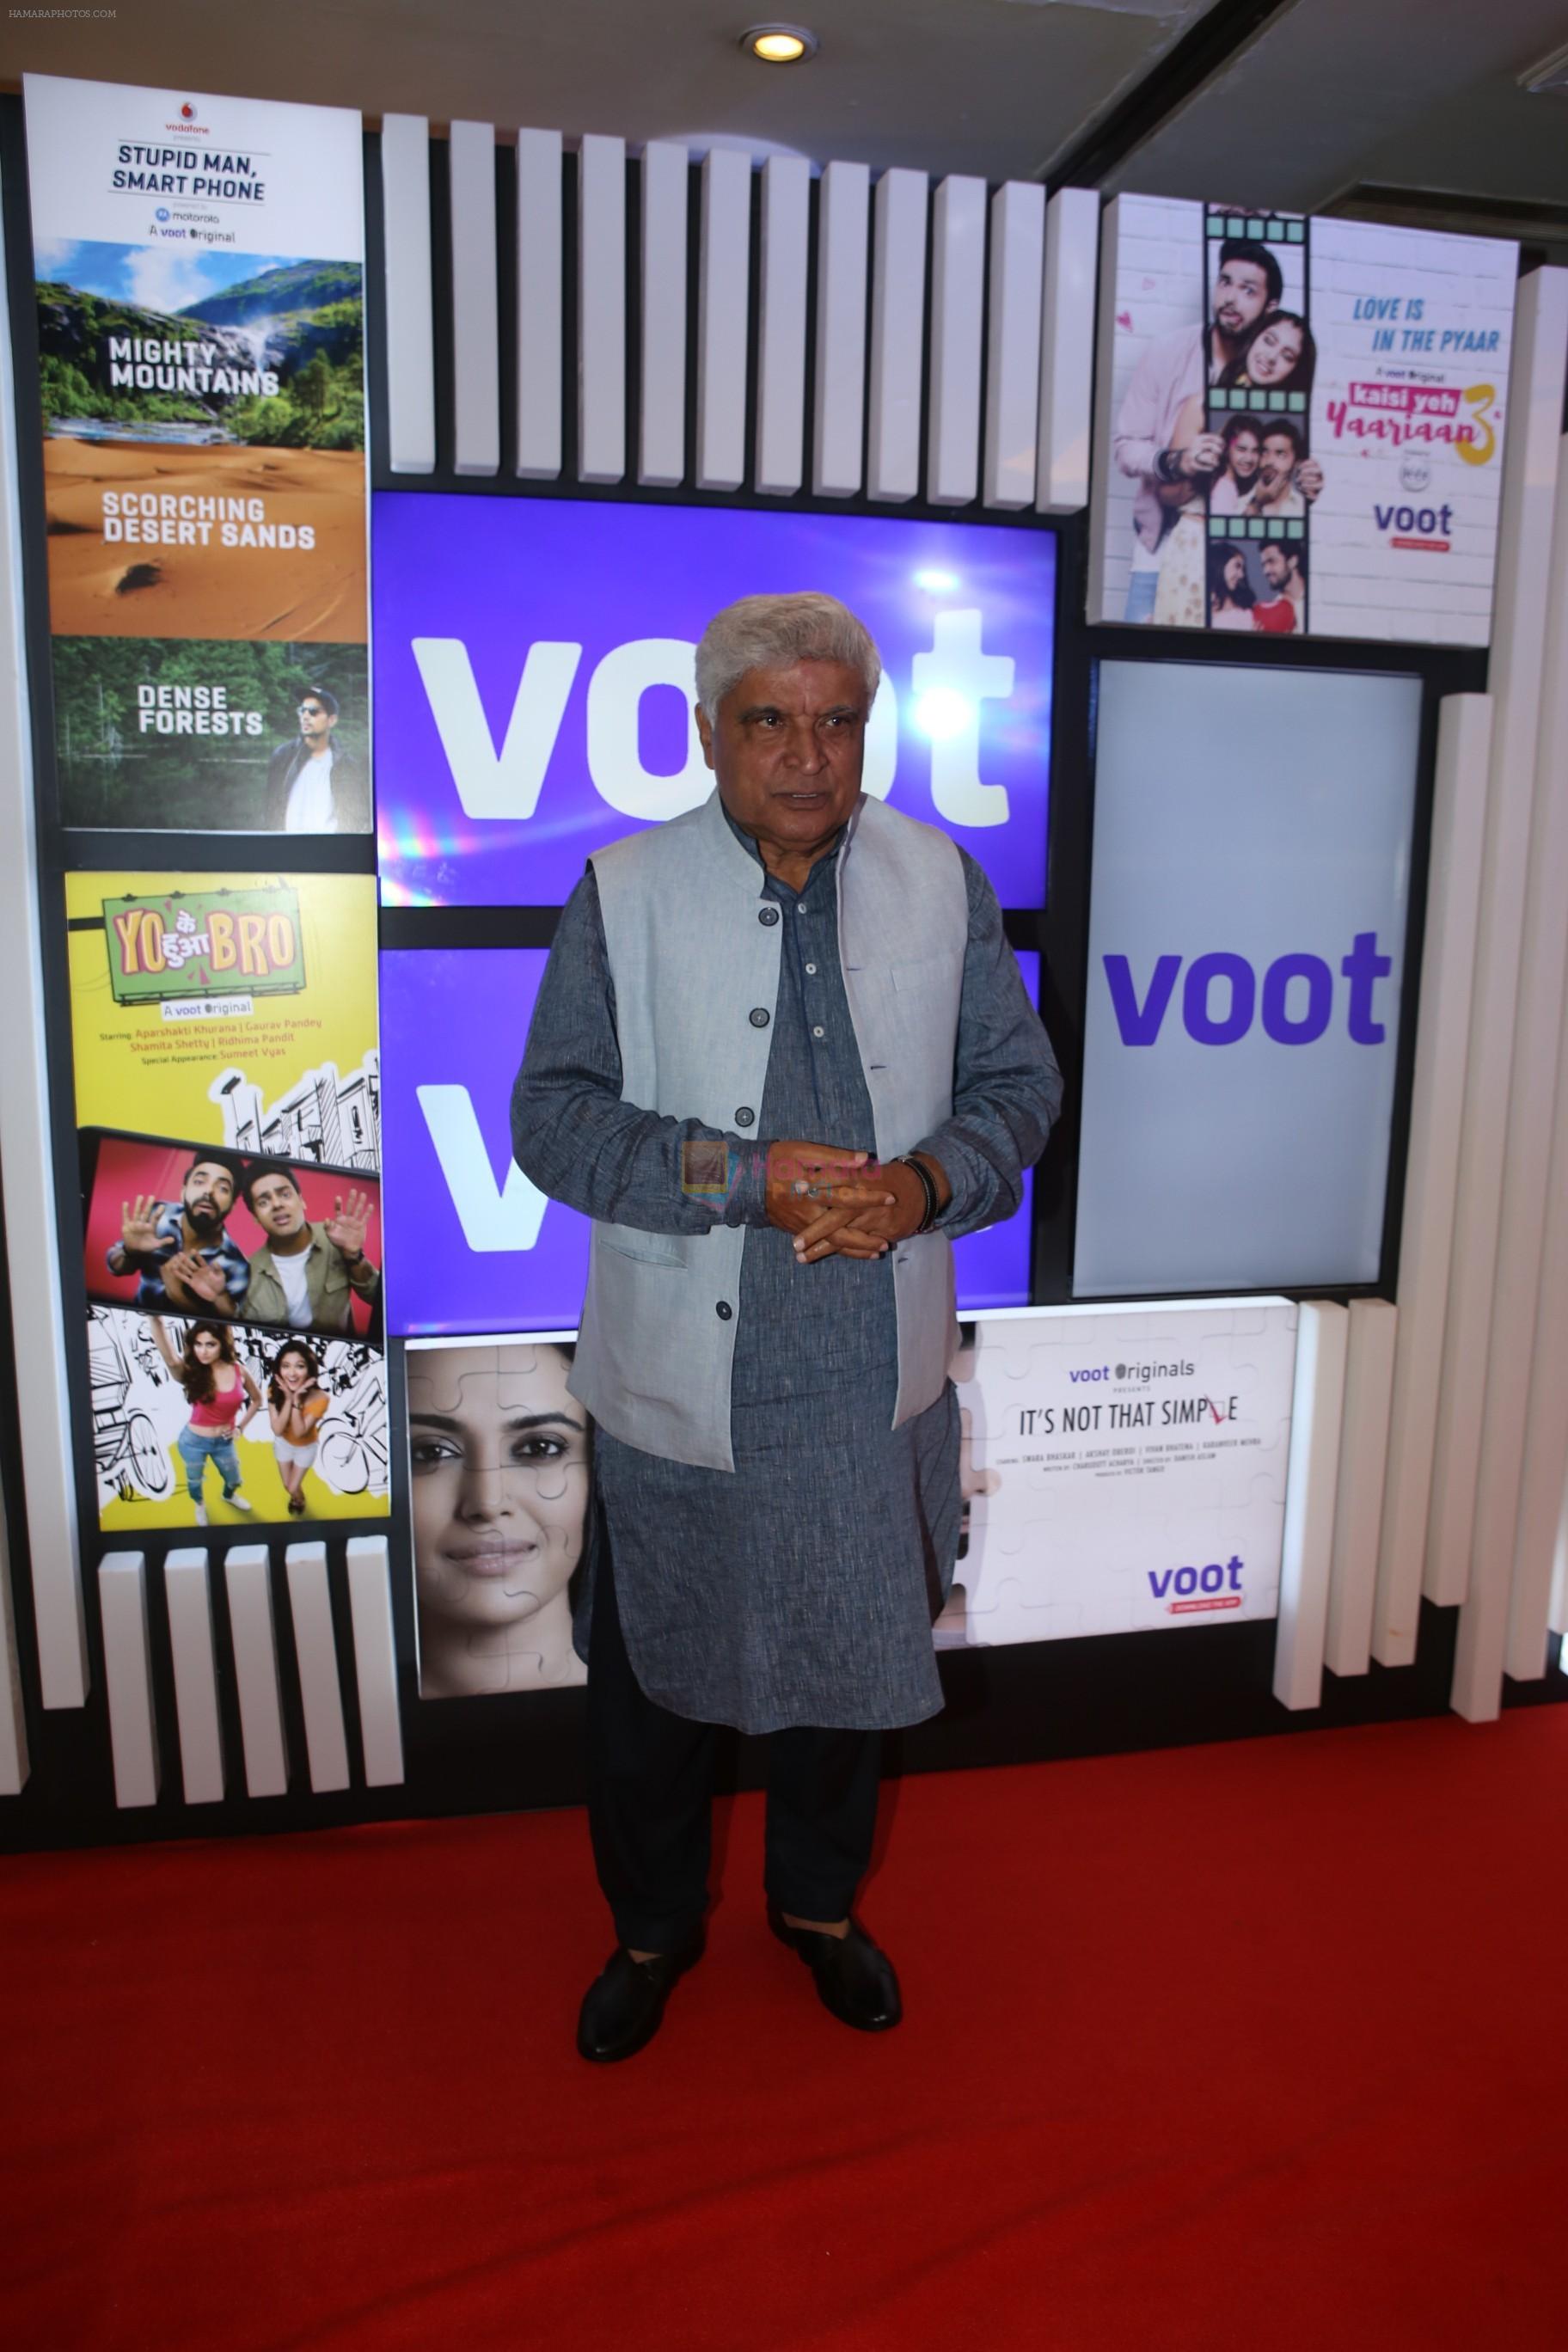 Javed Akhtar at Voot press conference in ITC Grand Maratha, Andheri on 30th AUg 2018